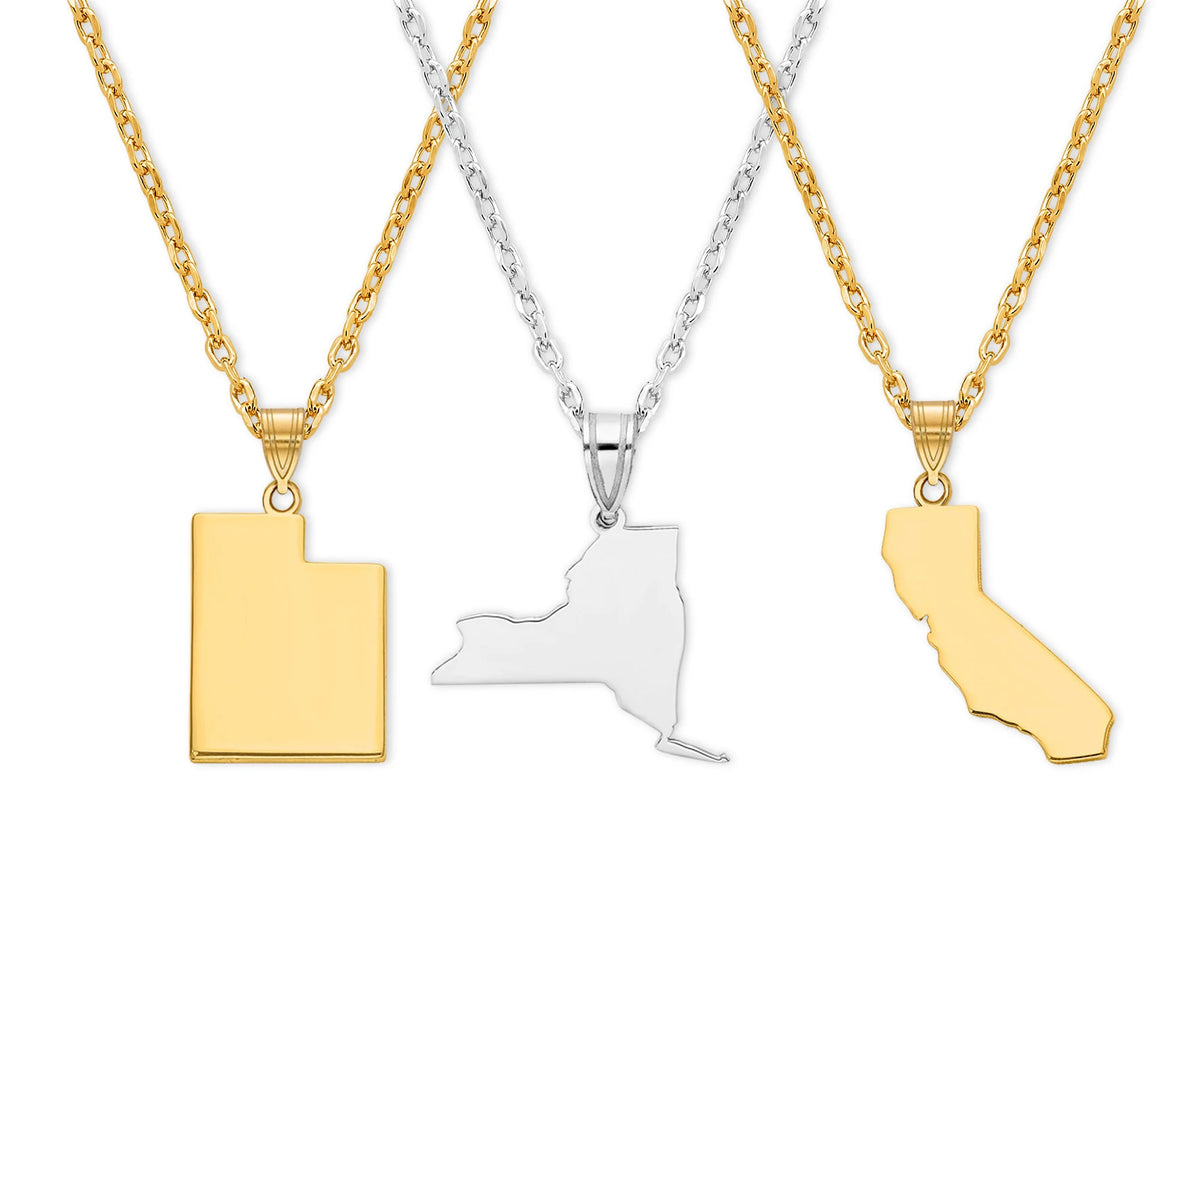 Alabama State Pendant Necklace Option / 14k & Sterling Silver State Shaped Pendant / Charm in Shape of State / Made In USA / With Gift Box